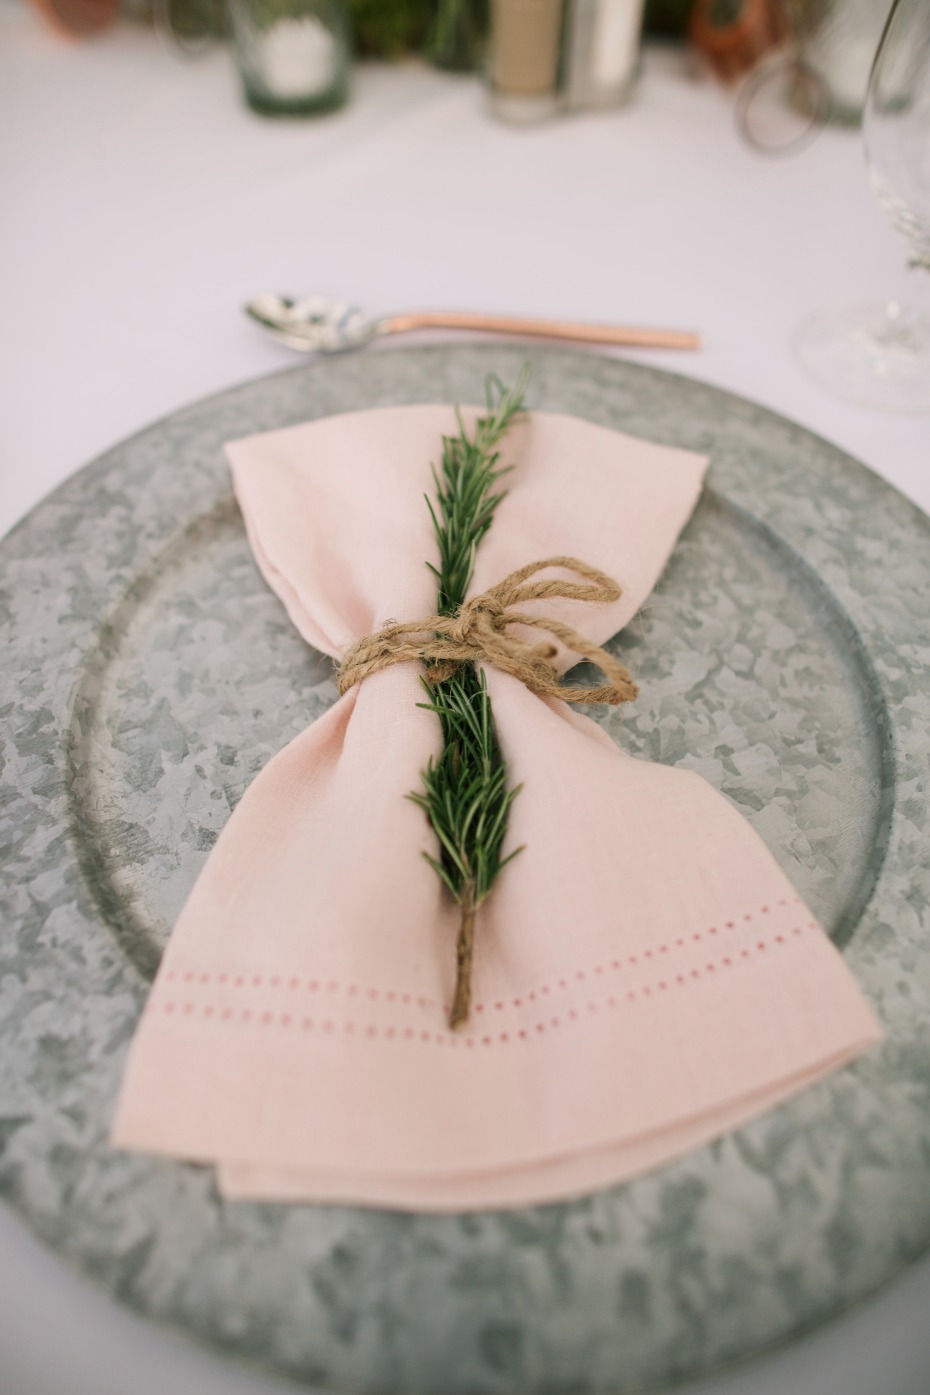 Simple place setting with a sprig of greenery